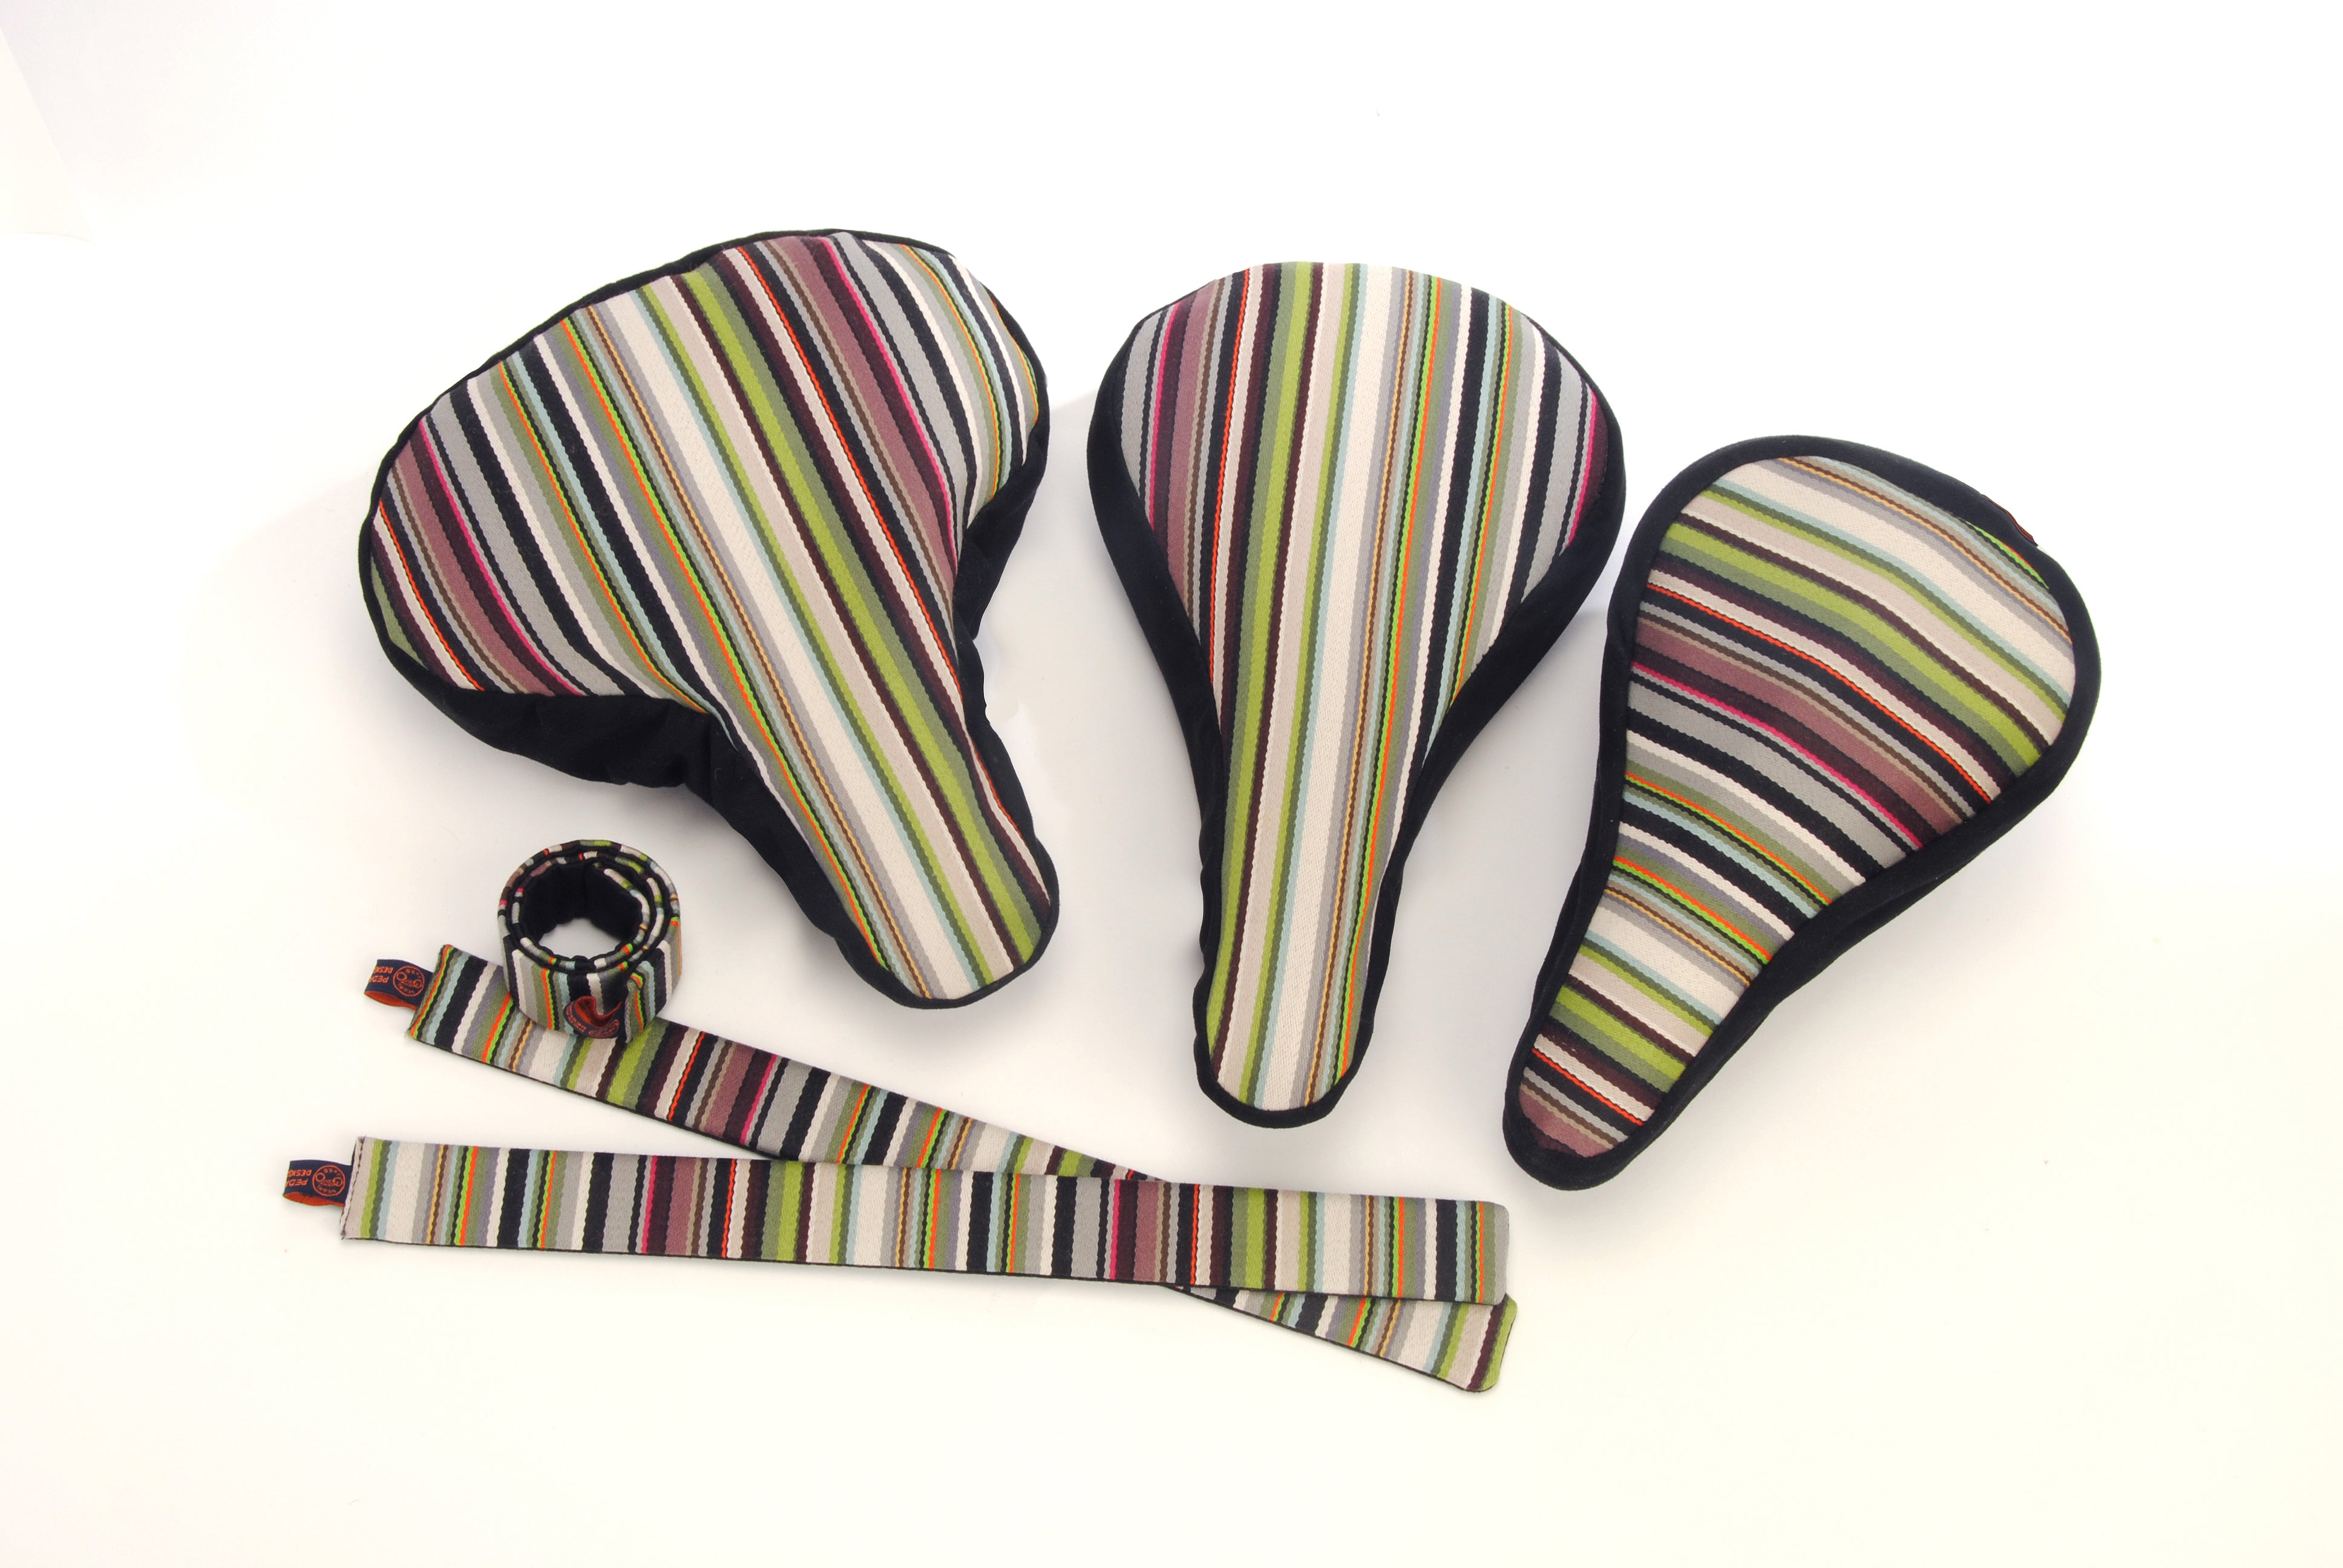 Paul Smith Stripes - Wide Bicycle Seat Cover - Pure Luxury